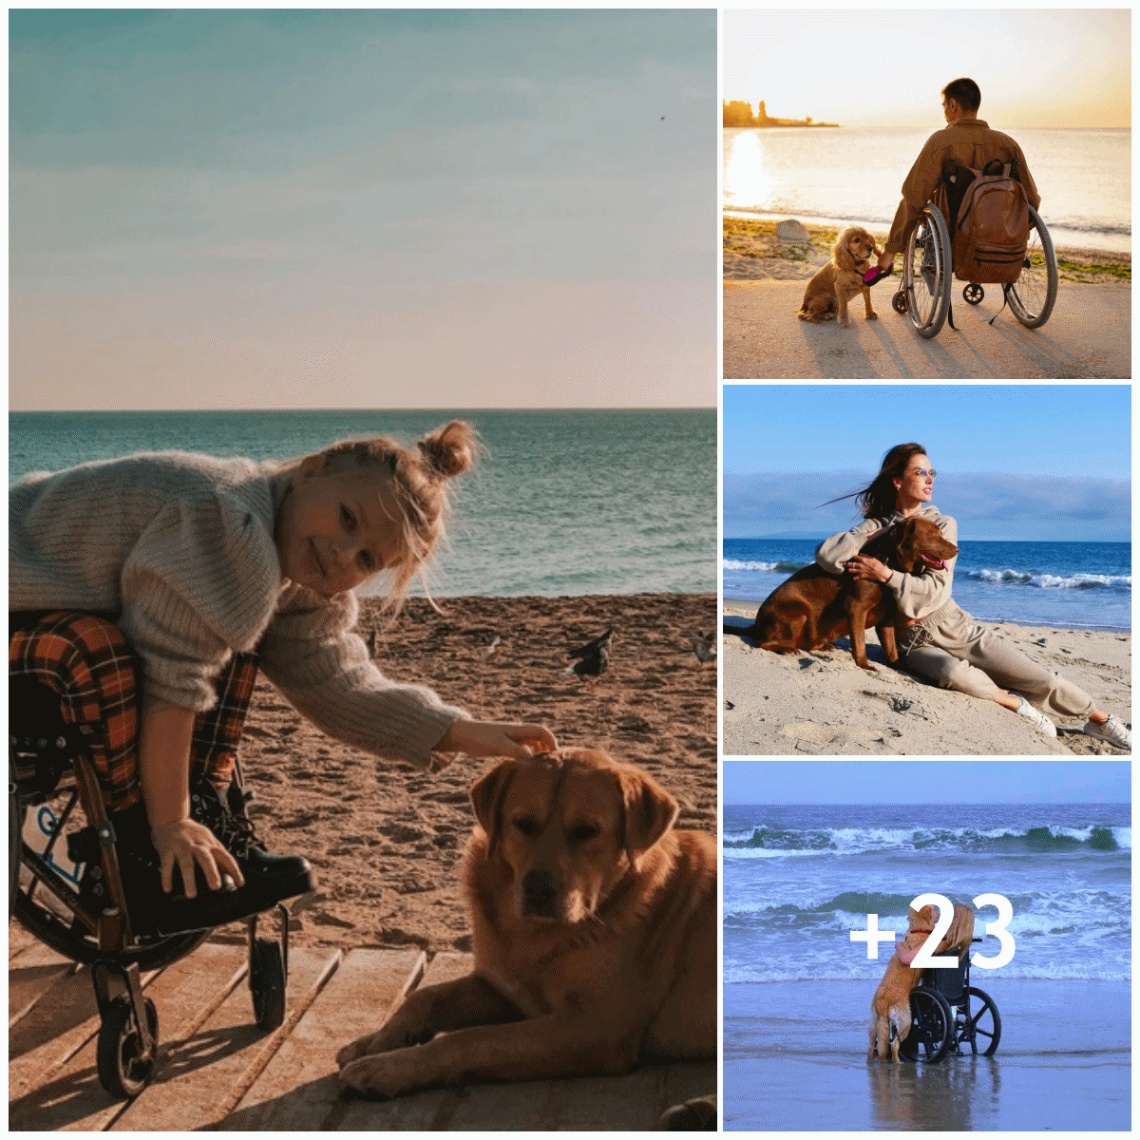 The dog always accompanies his disabled owner on trips, touching the hearts of readers.